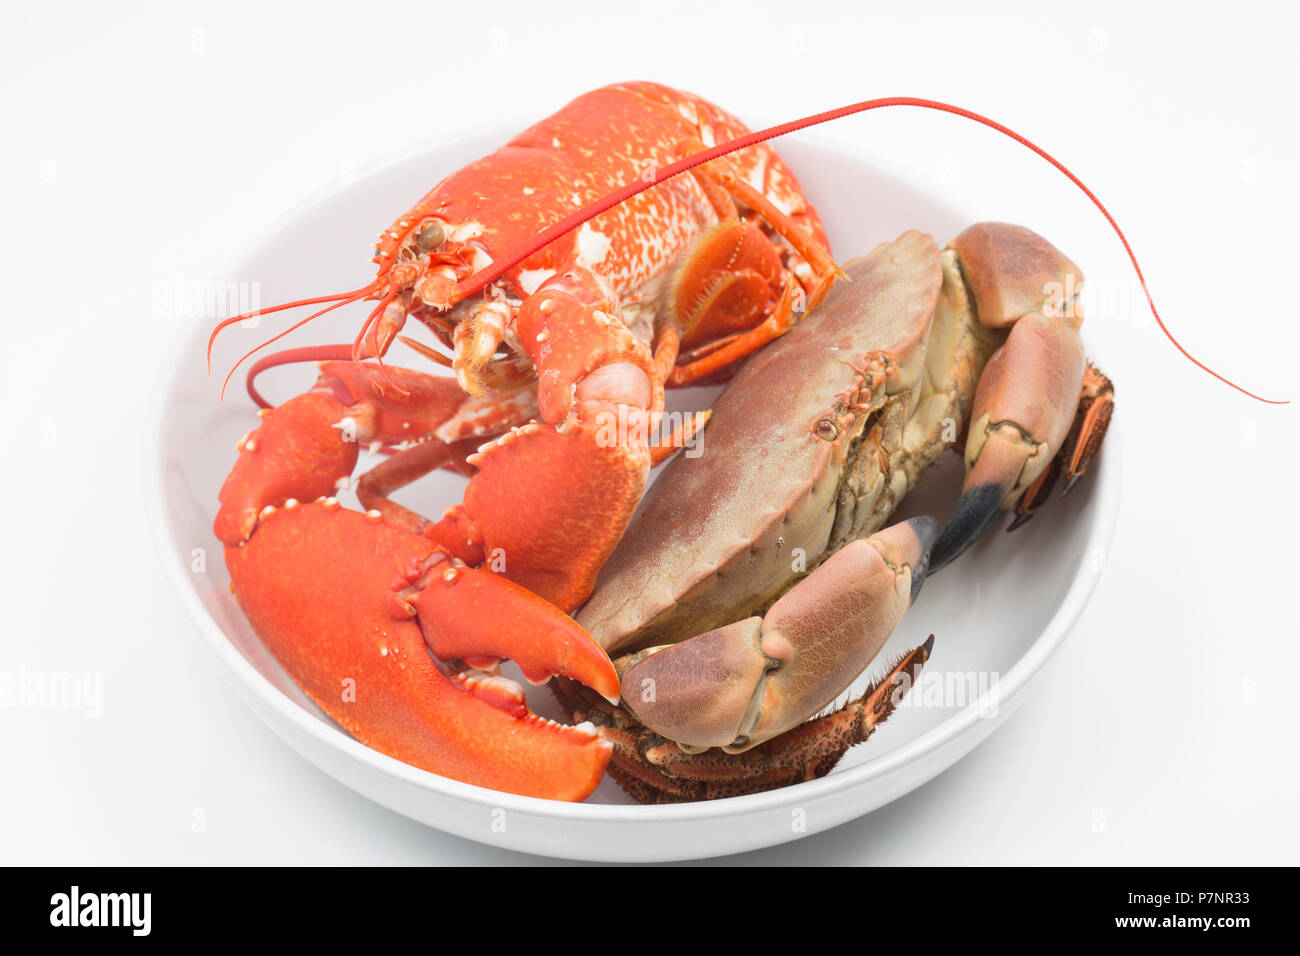 A boiled, cooked lobster, Homarus gammarus, and a boiled, cooked edible crab, Cancer pagurus, from the English Channel that have been caught in a pot. Stock Photo